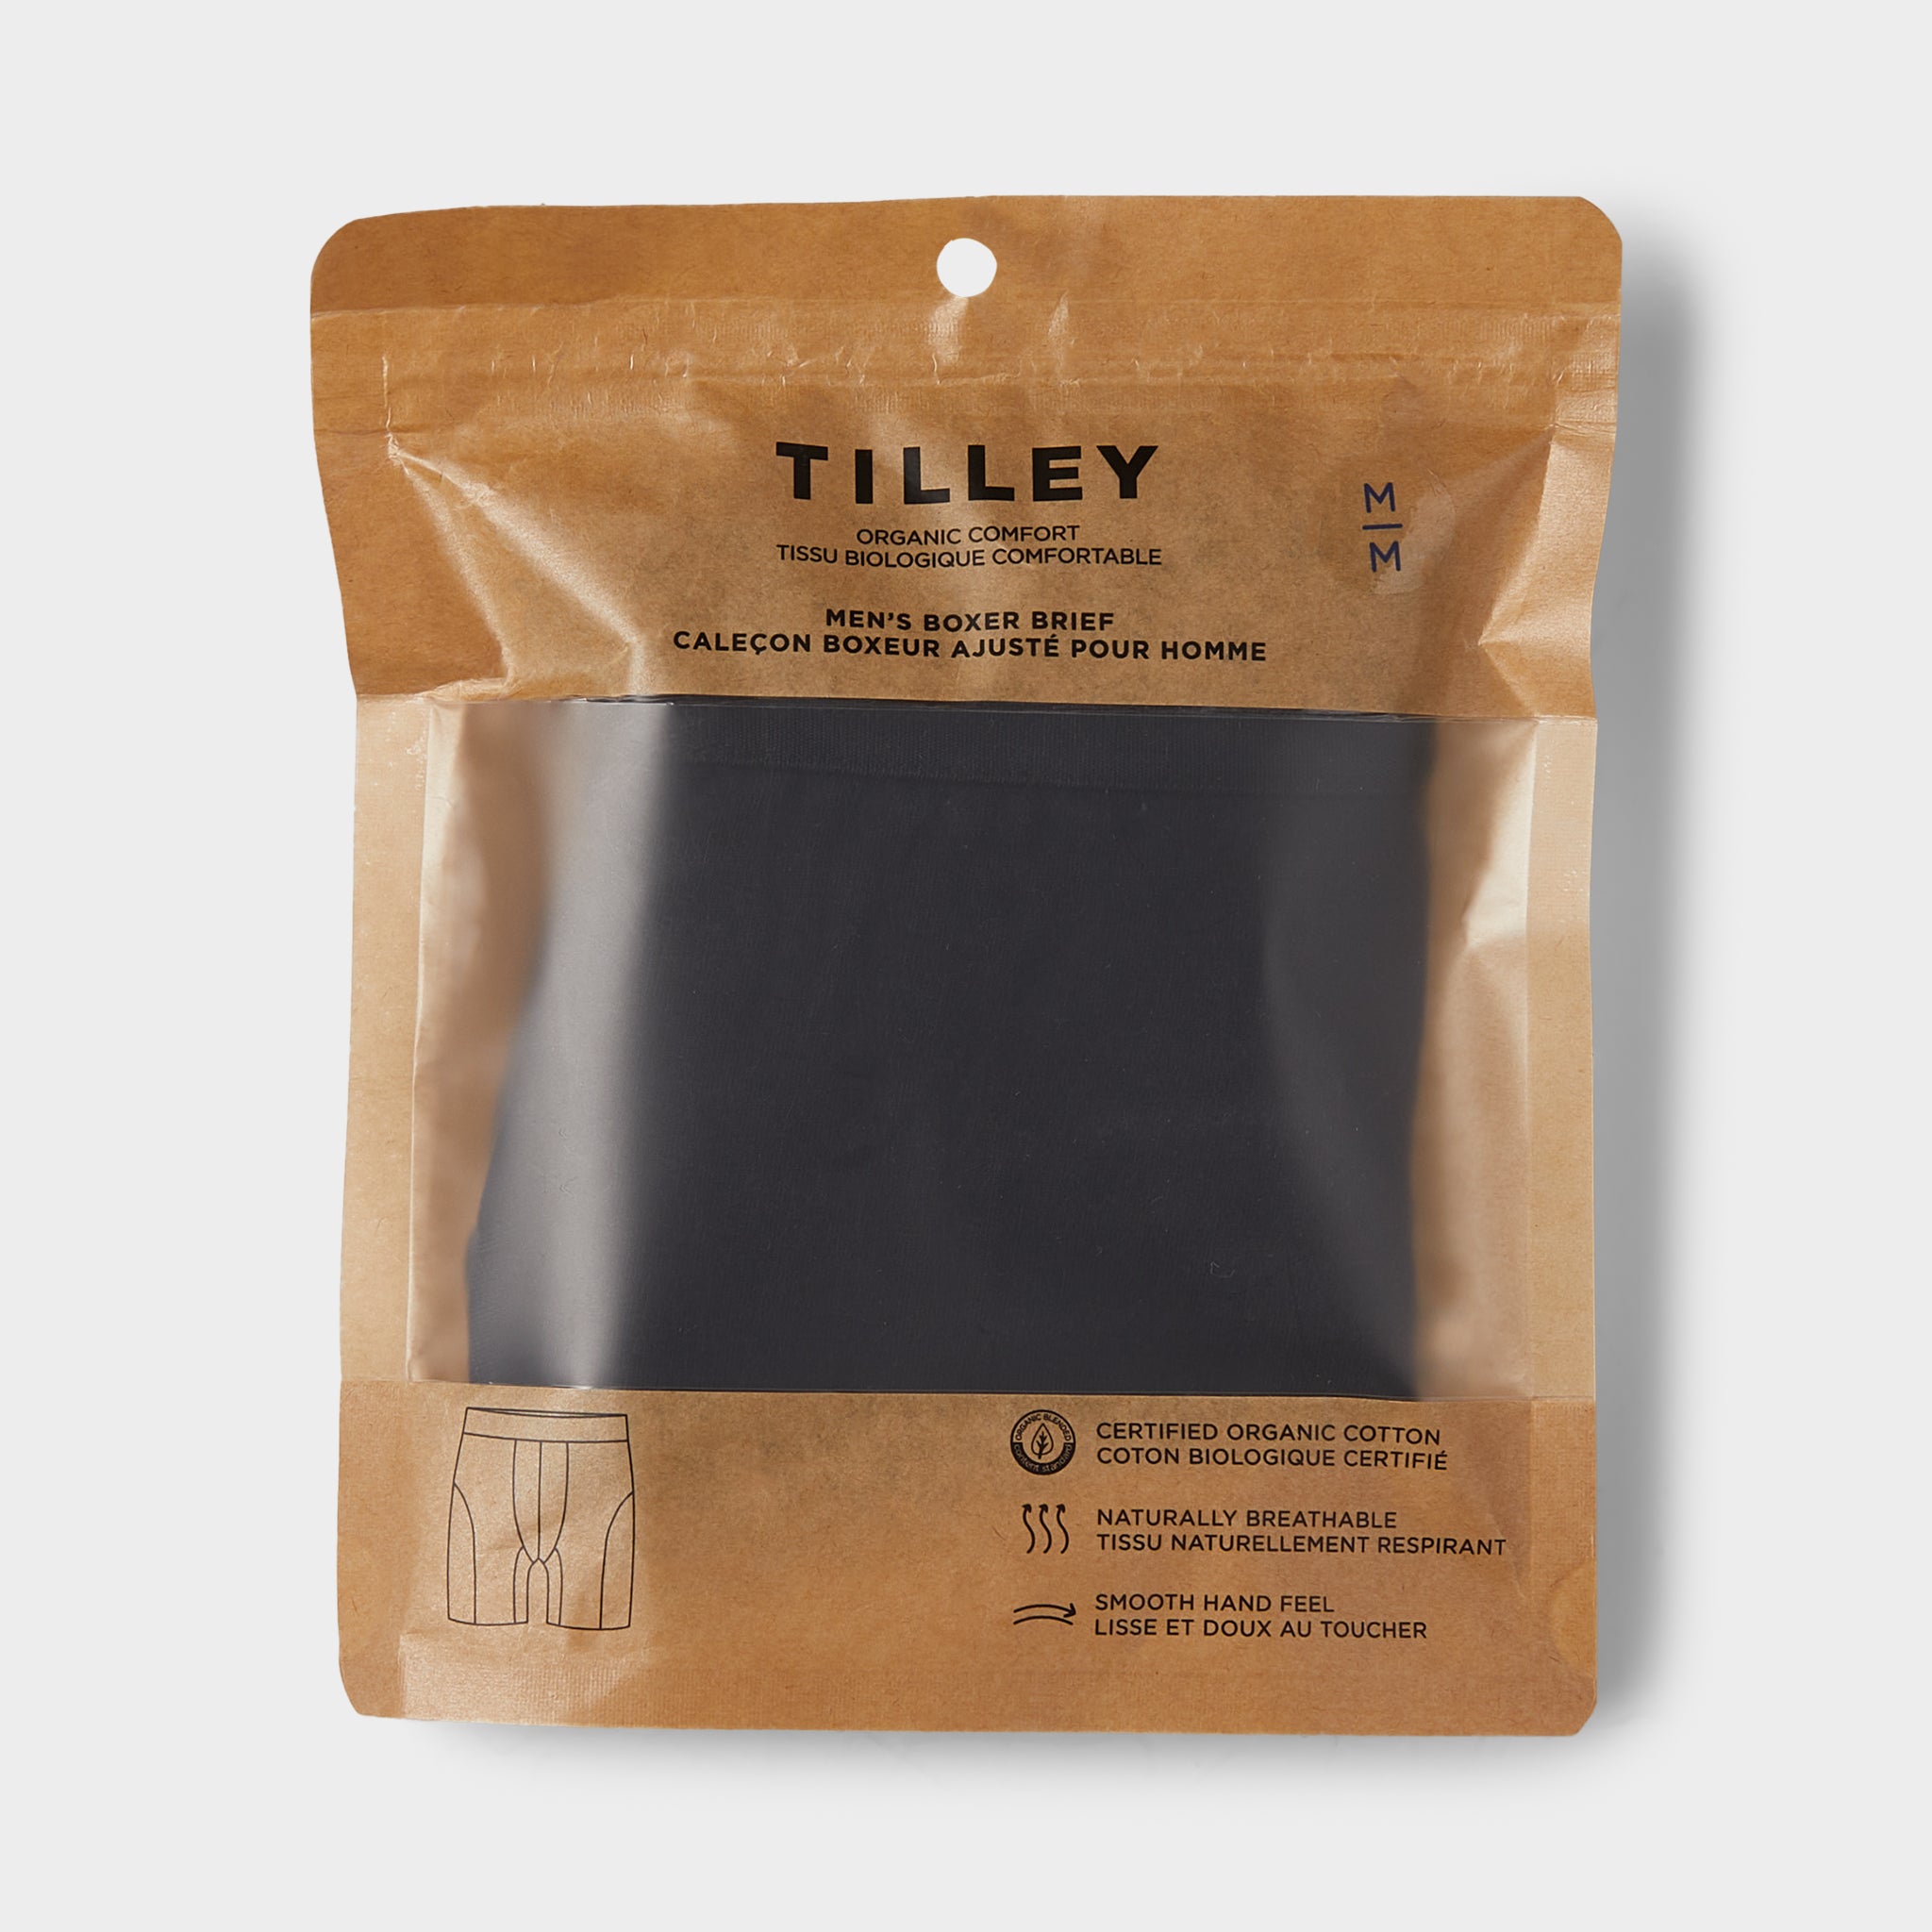 Tilley Travel Underwear 28-30 Men Fast Drying quick wick anti microbial 